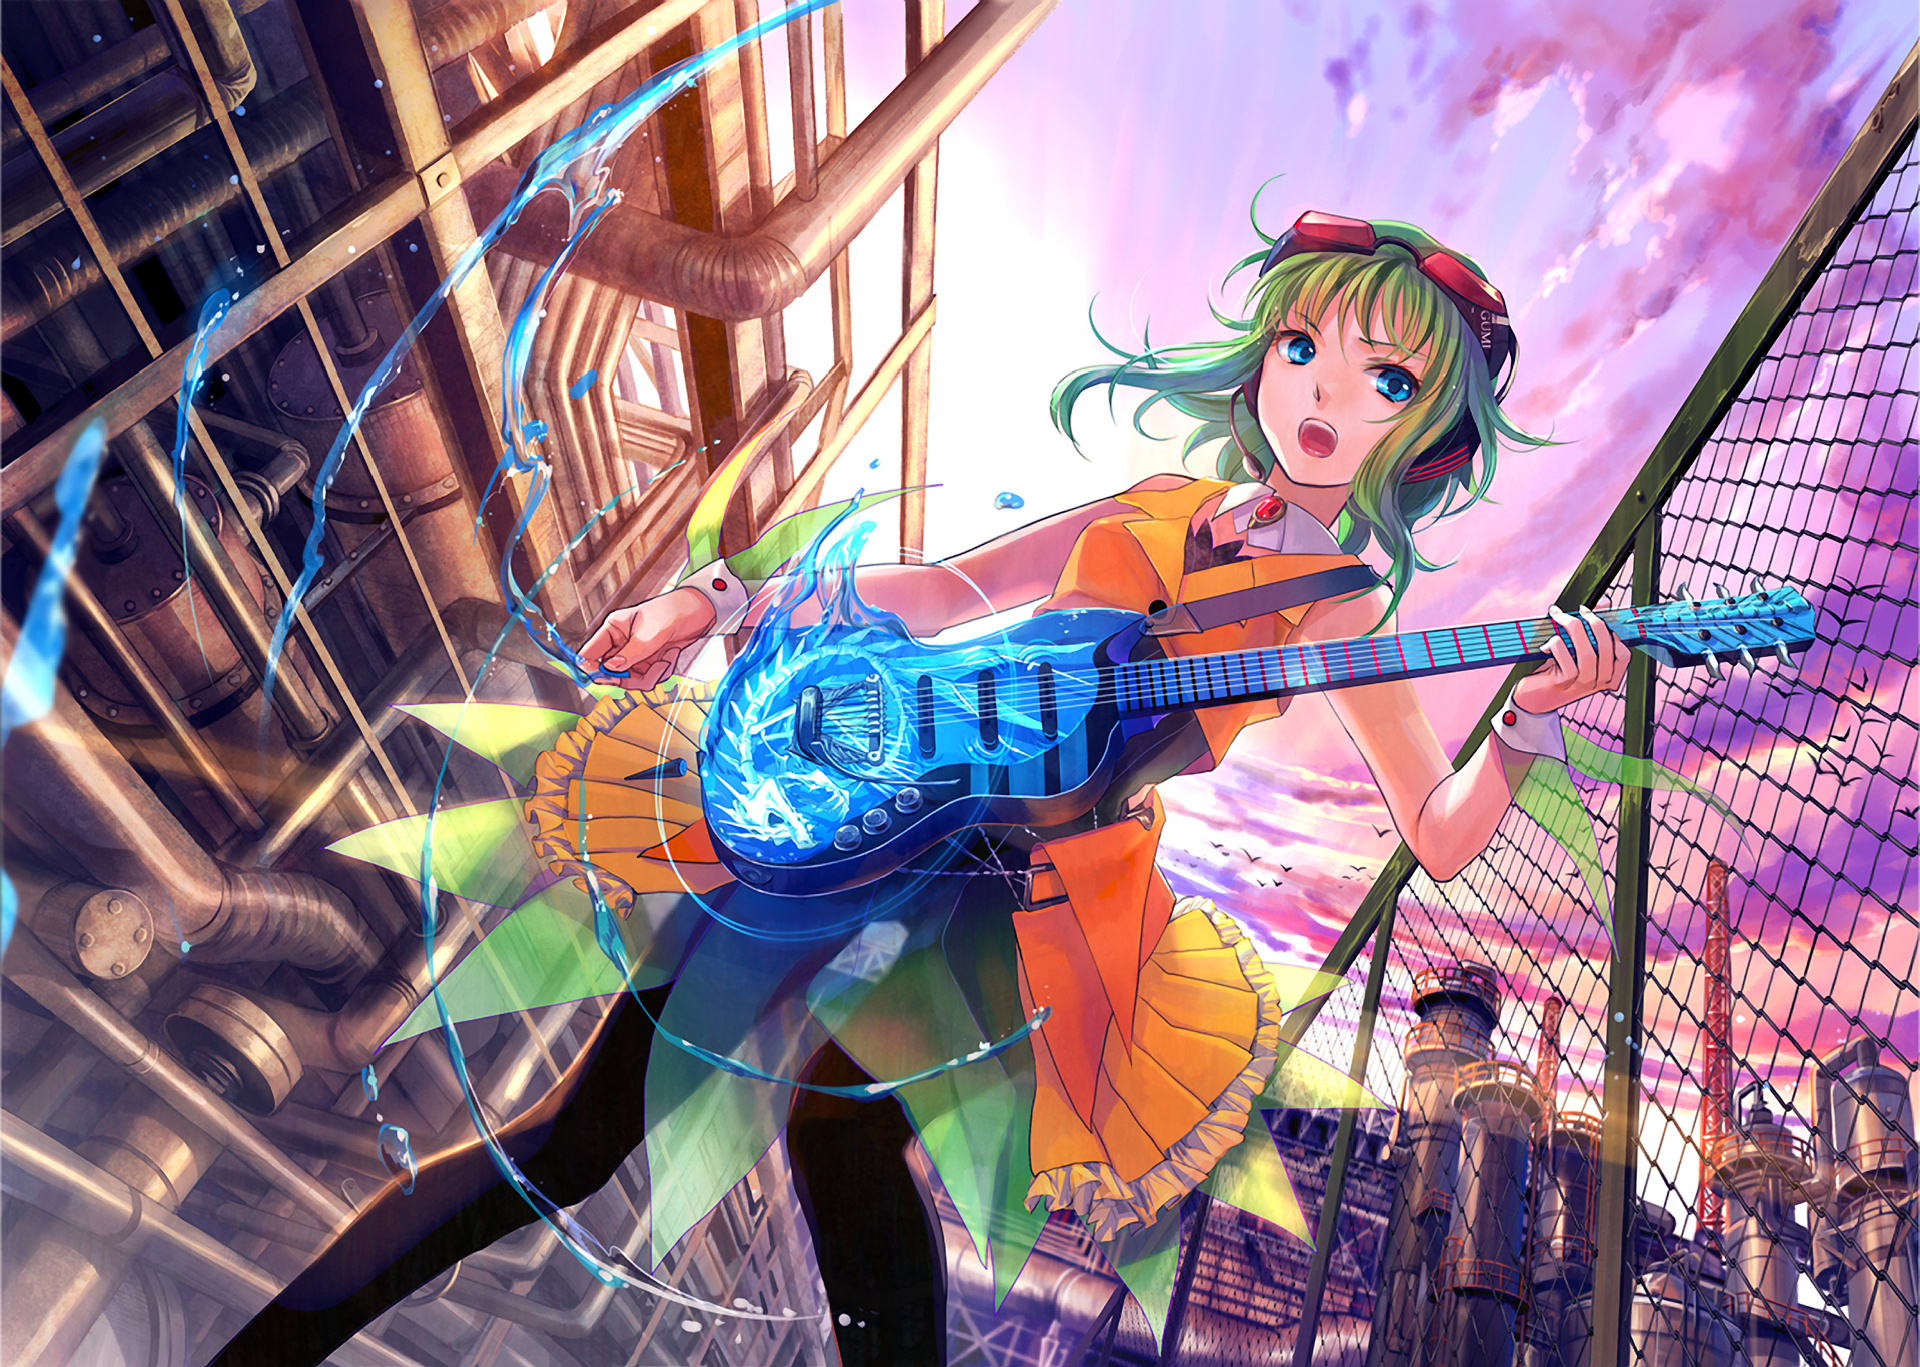 GUMI Vocaloid art, Captivating illustrations, Melodic songs, Anime-inspired charm, 1920x1370 HD Desktop